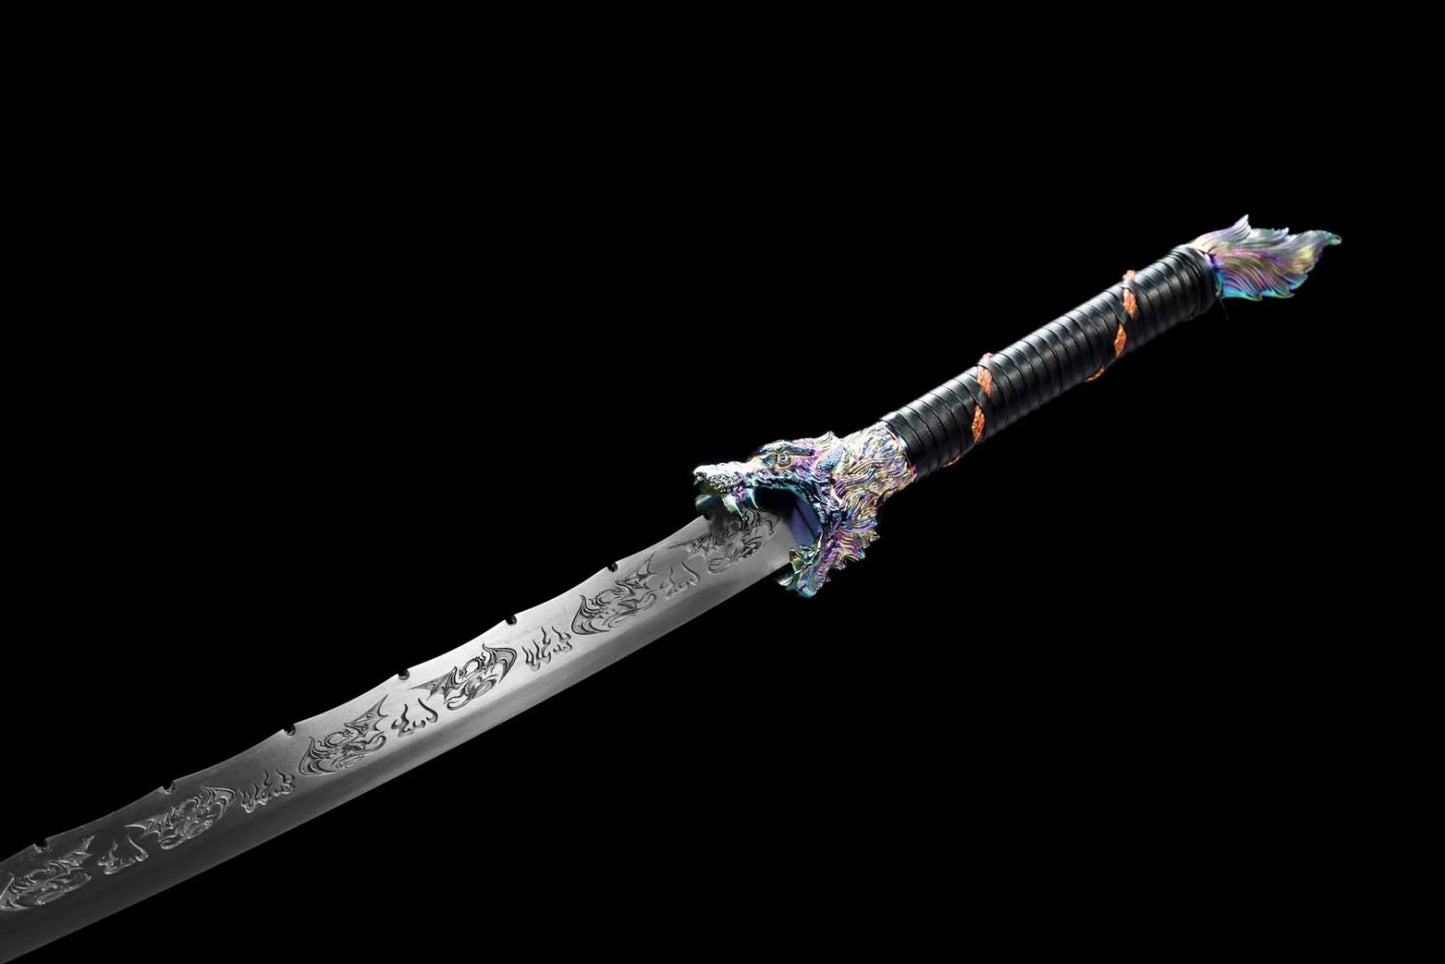 LOONGSWORD,Handcrafted Wolf-Head Broadsword with High Carbon Steel Blade-Forged Patterned Edge and Alloy Fittings